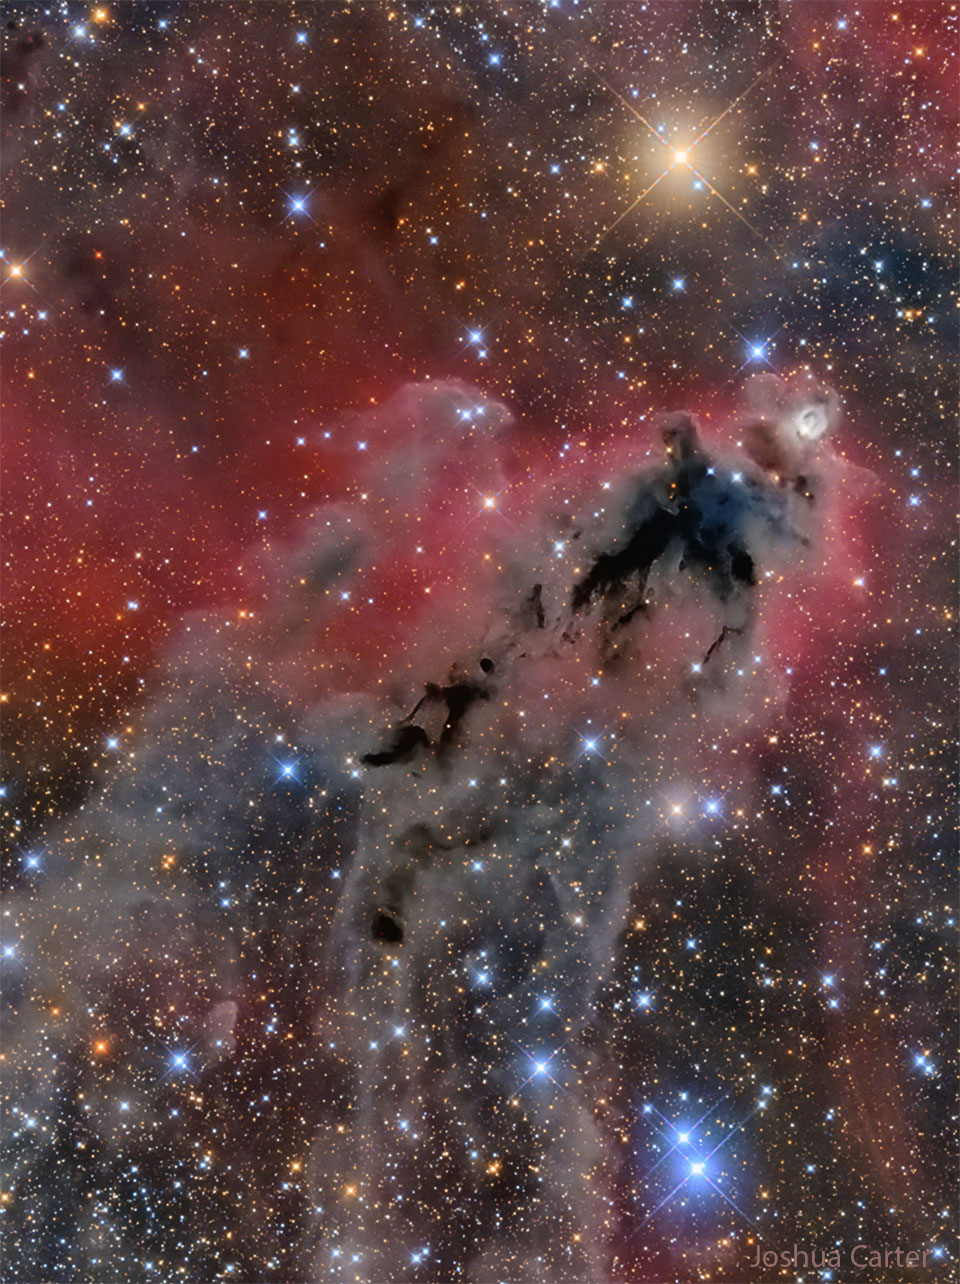 An image of a foreboding dark nebula before a red-glowing gas 
background and many bright and colourful stars.
Please see the explanation for more detailed information.